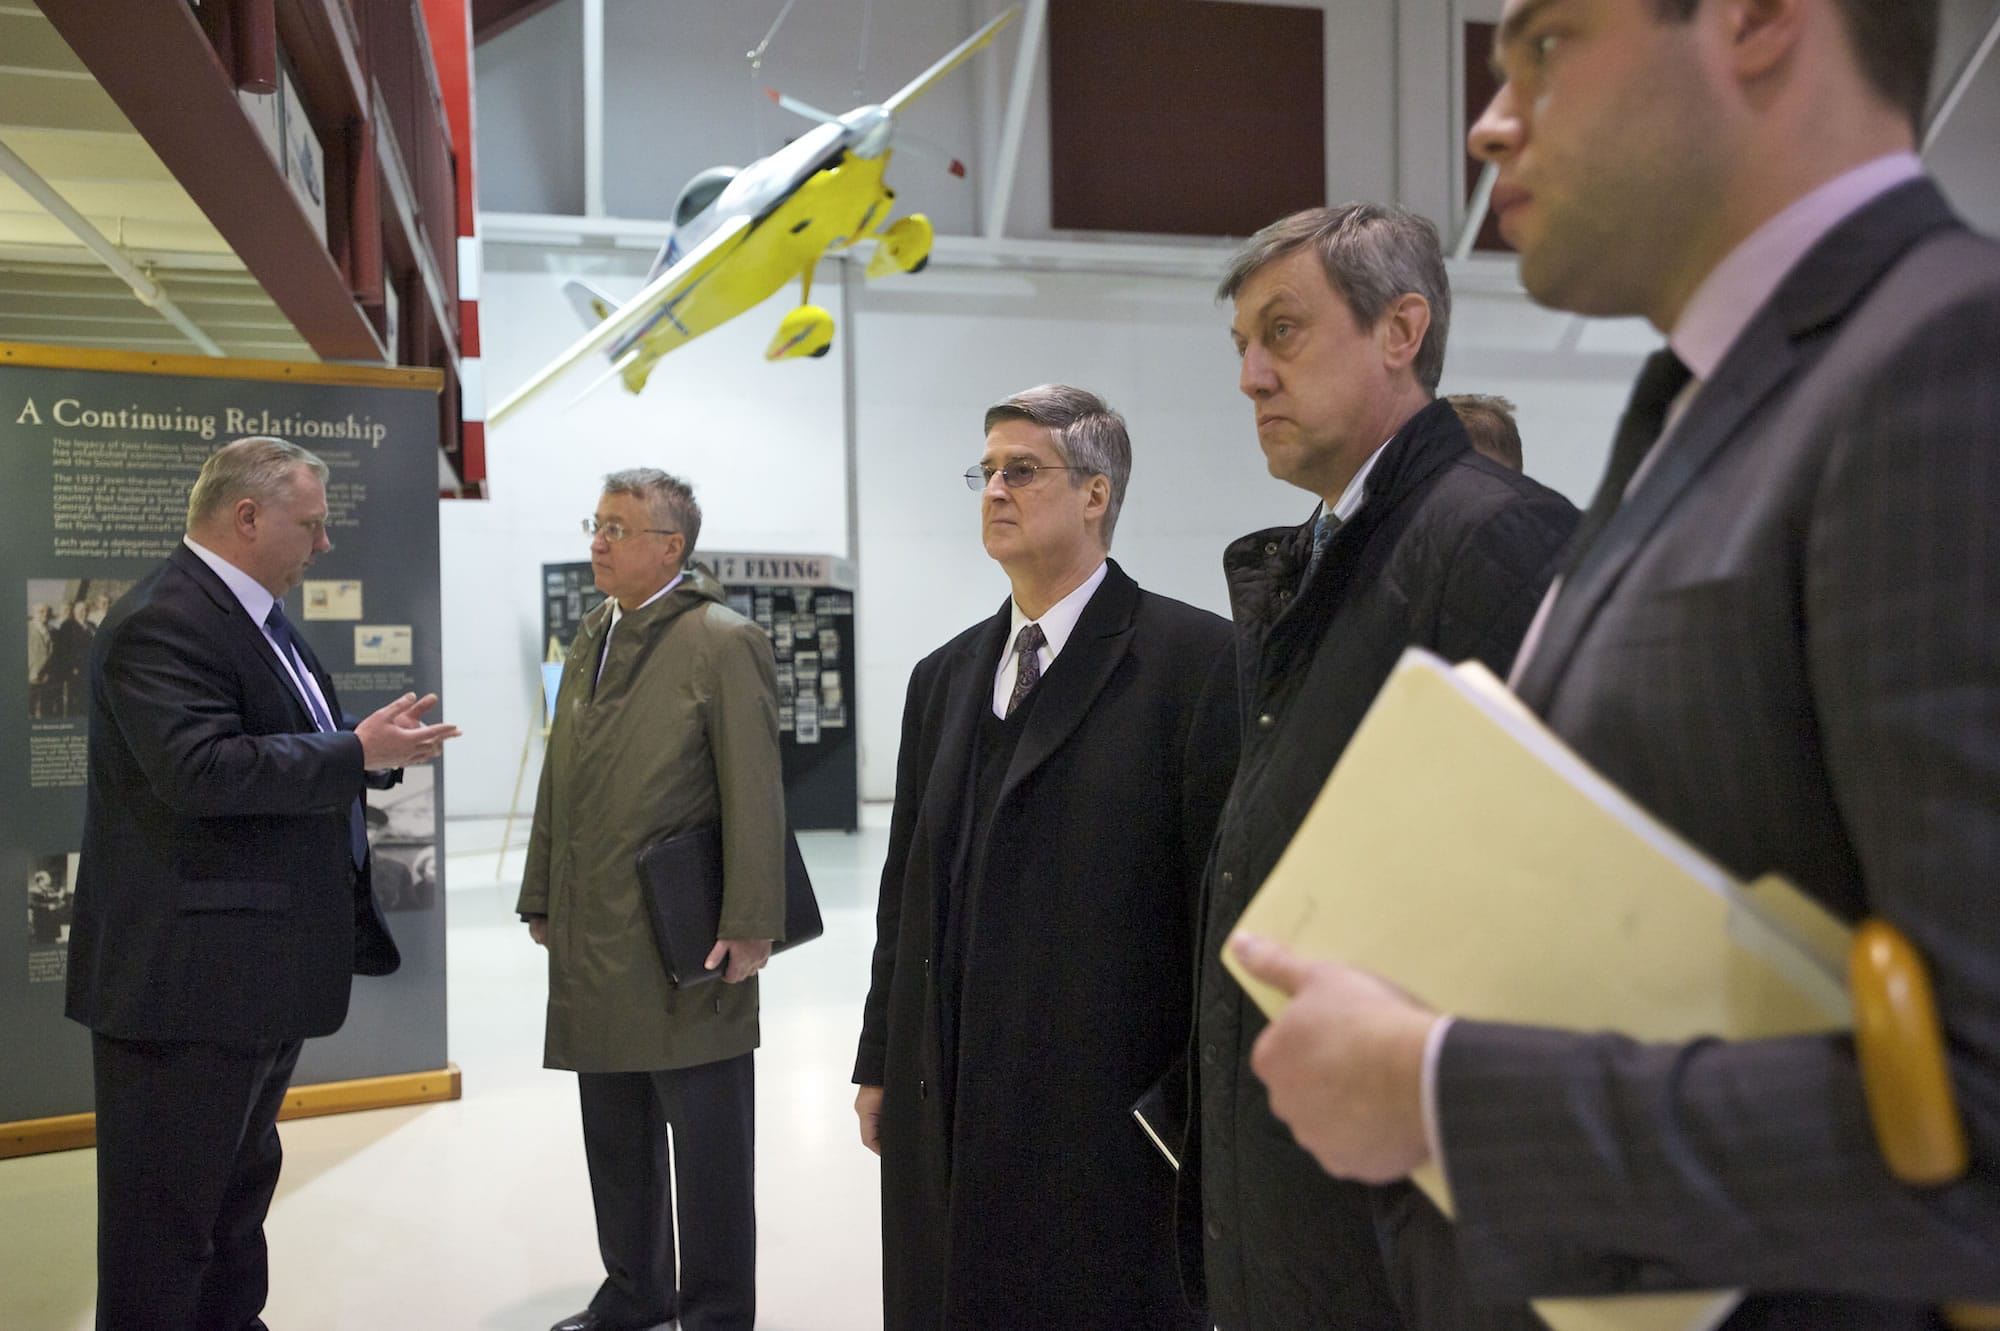 Valery Chkalov, left, grandson and namesake of famed Soviet aviator Valery Chkalov, speaks to Vladimir Vinokurov, Russia's consul general in San Francisco, while Doug Lasher looks at trans-polar flight panels with Andrey Yushmanov, Russian consul general in Seattle and his head of protocol, Evgeny Uspenskiy, during Wednesday's visit to Pearson Air Museum.